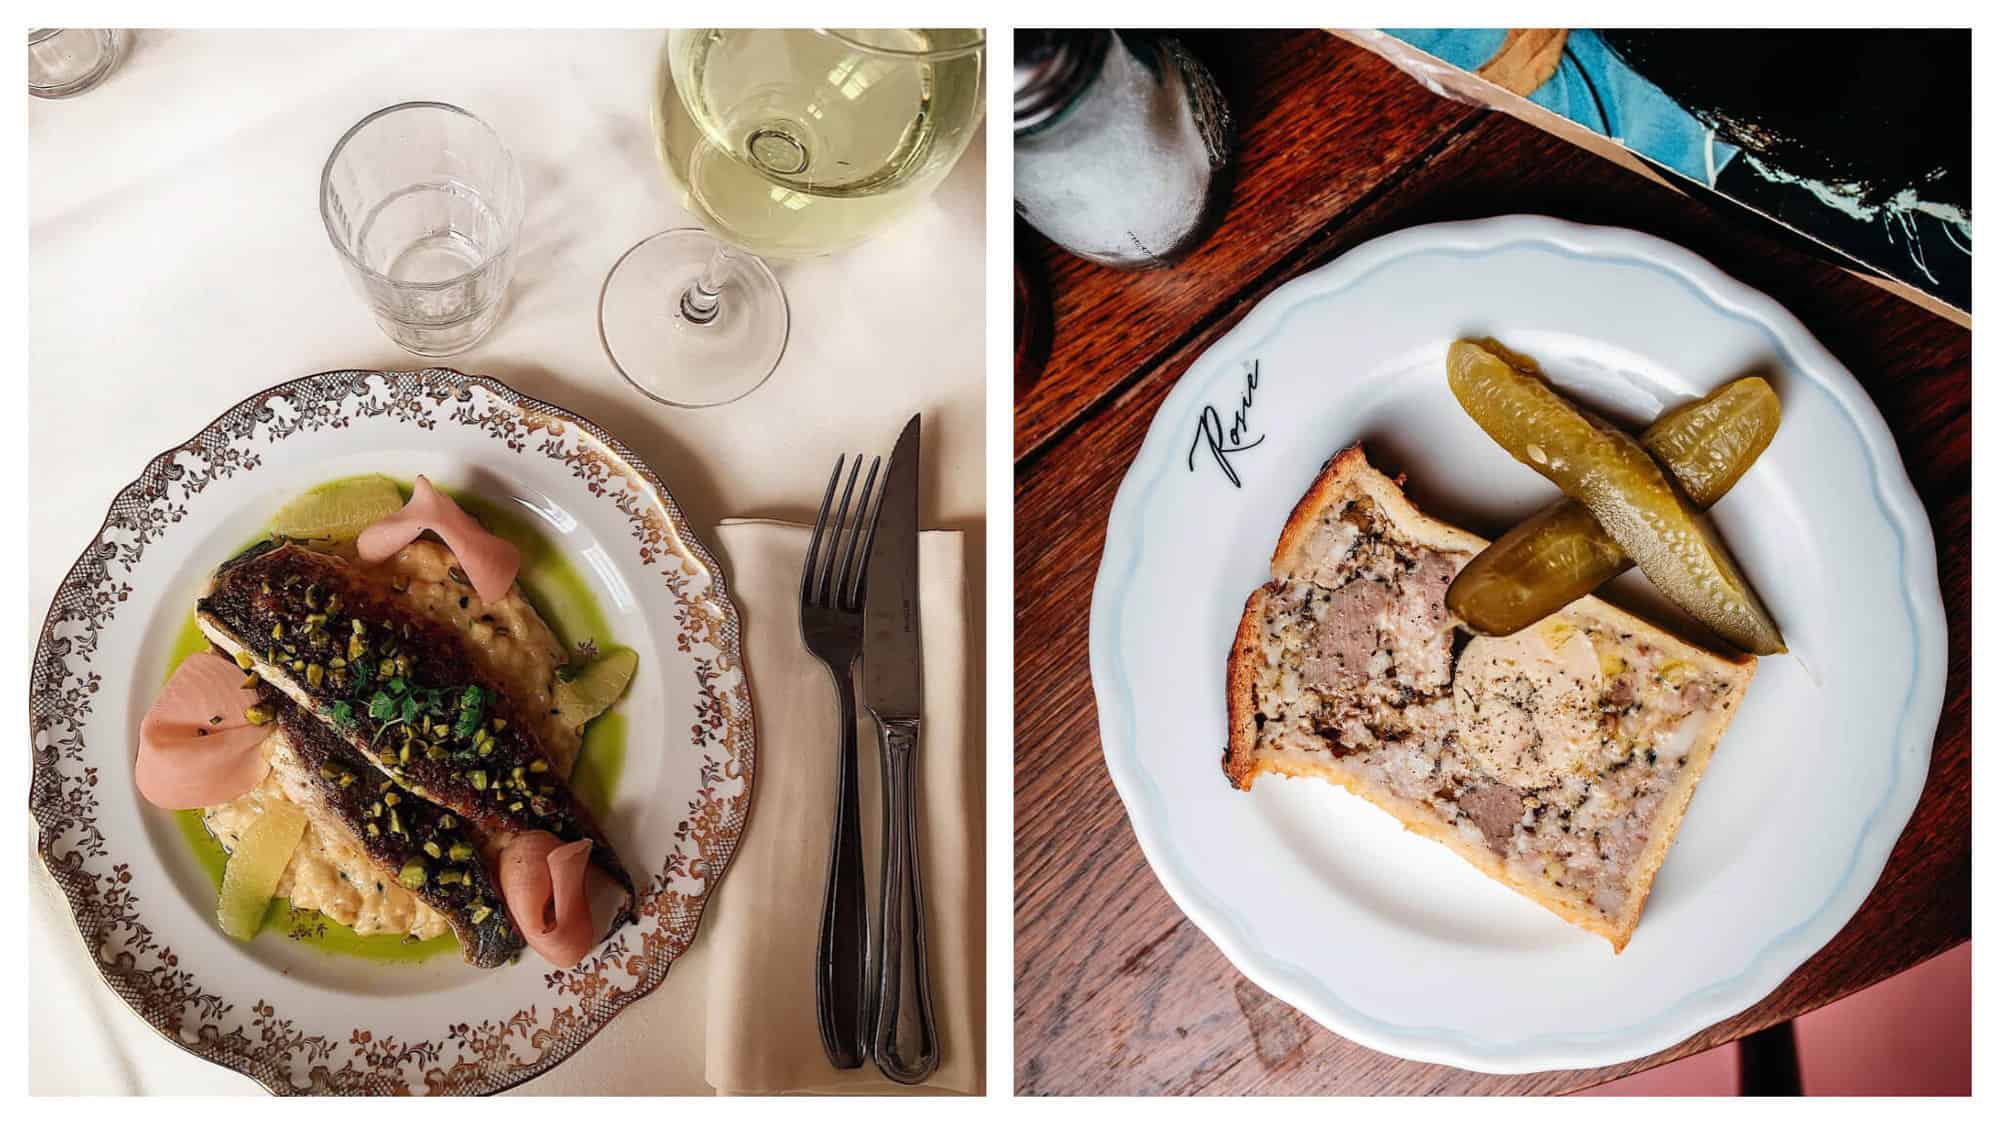 Left: a fish dish with a glass of white wine on a table at Brasserie Rosie. Right: terrine and pickles on a table at Brasserie Rosie.